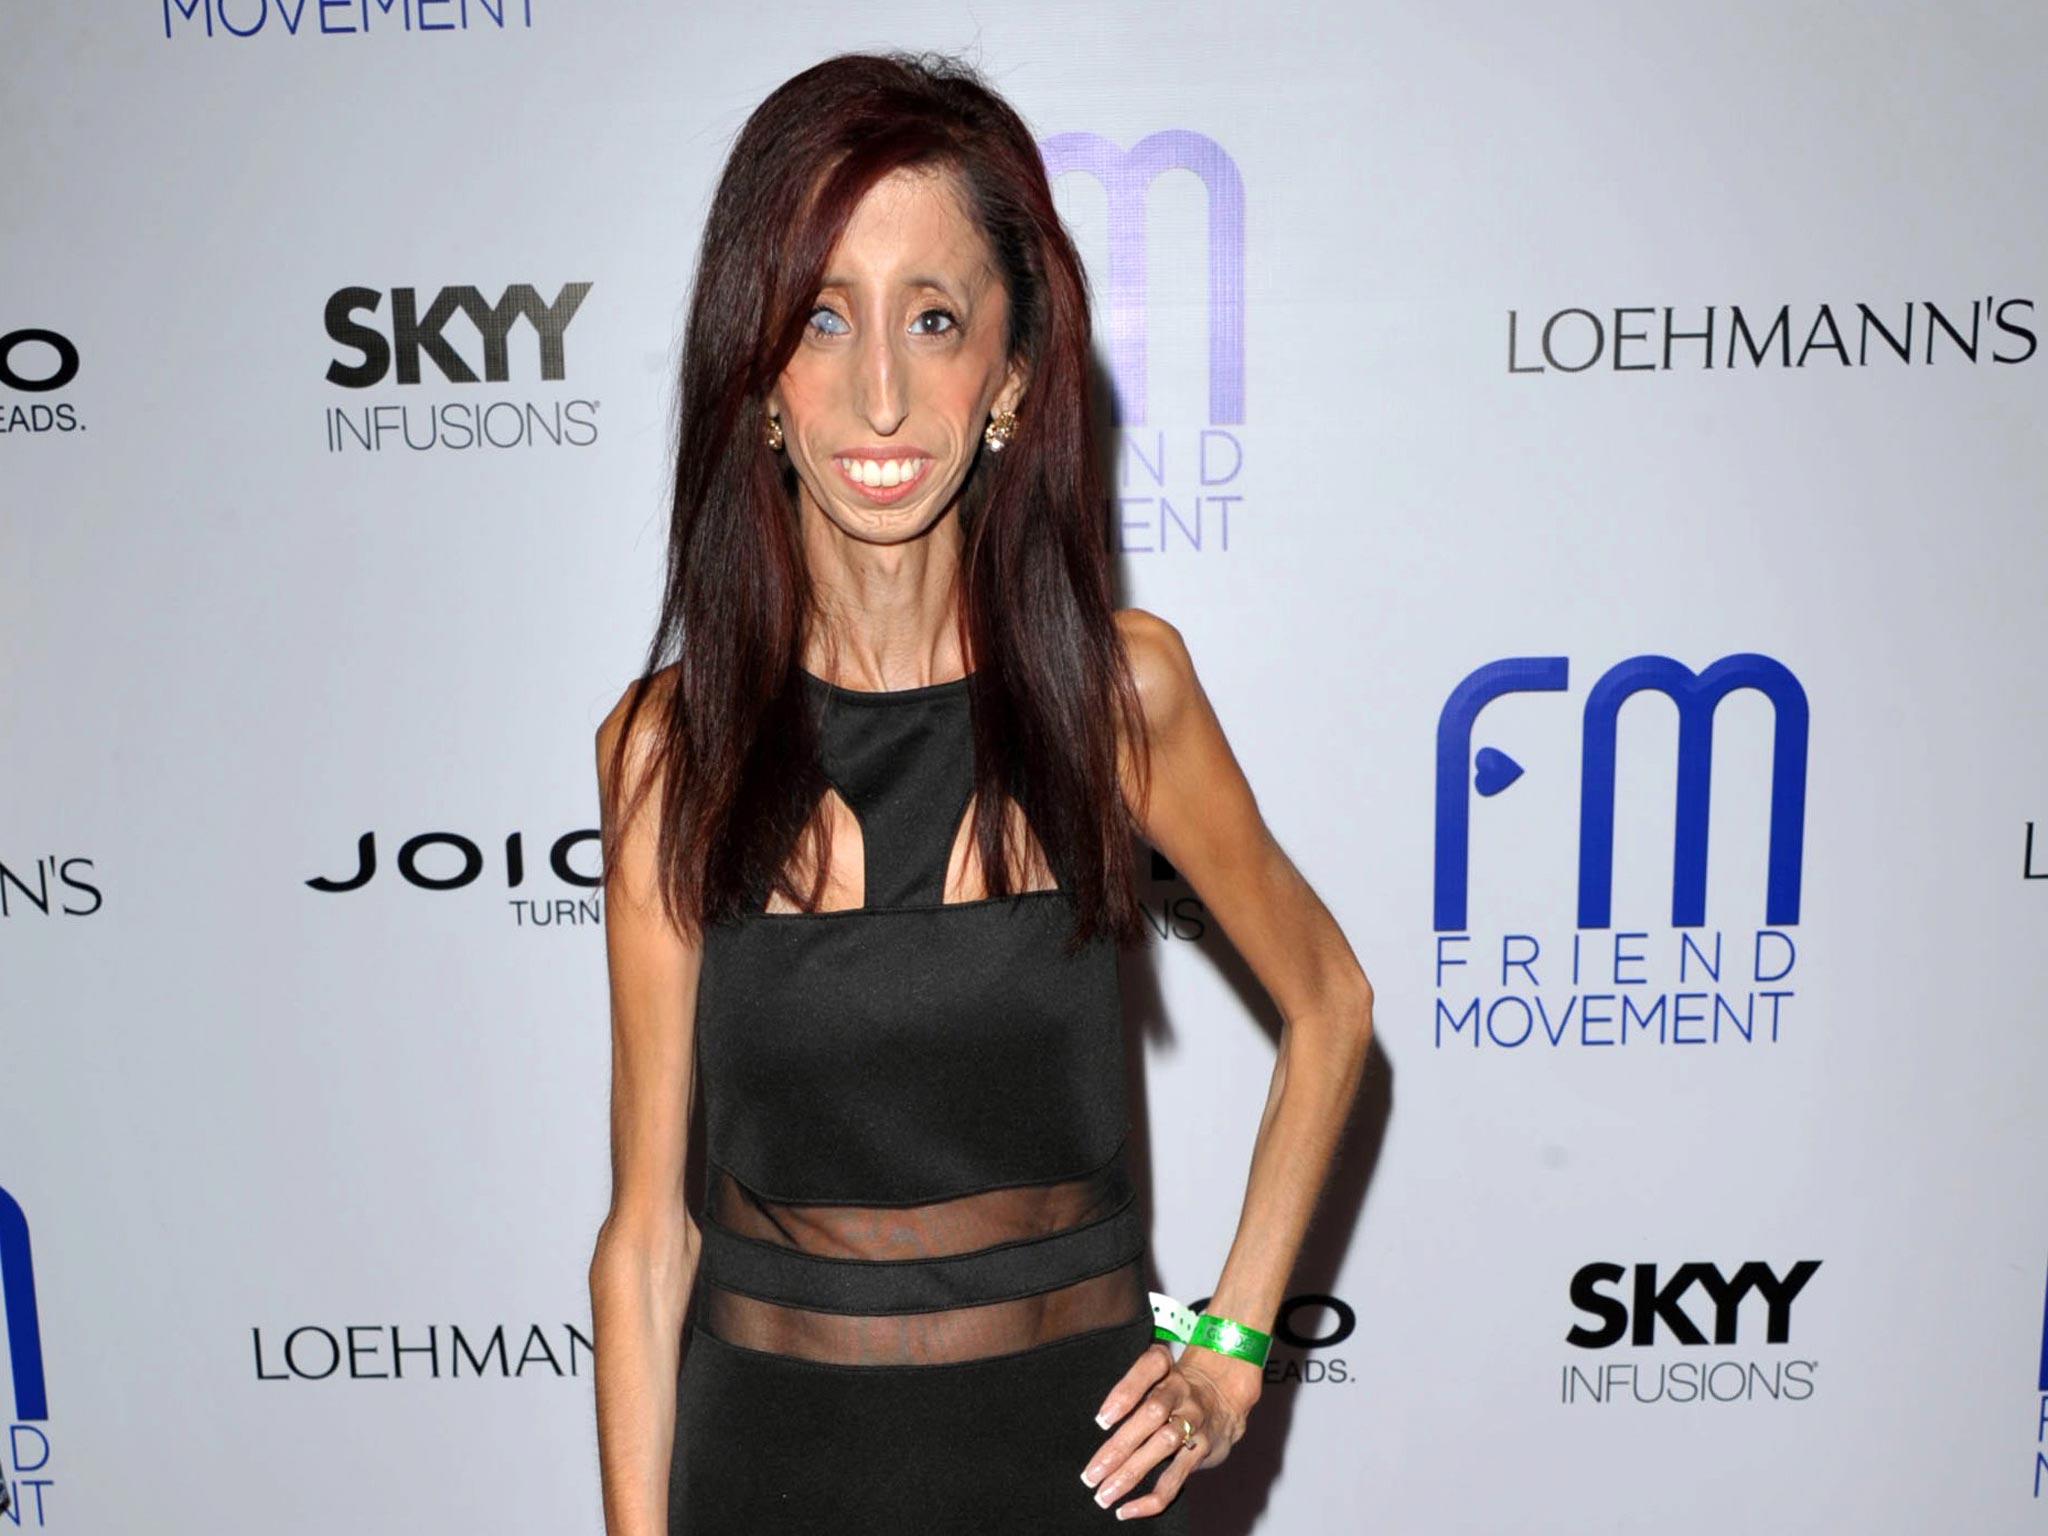 Lizzie Velasquez, who possesses a rare and unknown syndrome that prevents her from gaining weight. She is raising funds on Kickstarter for an anti-bulling documentary